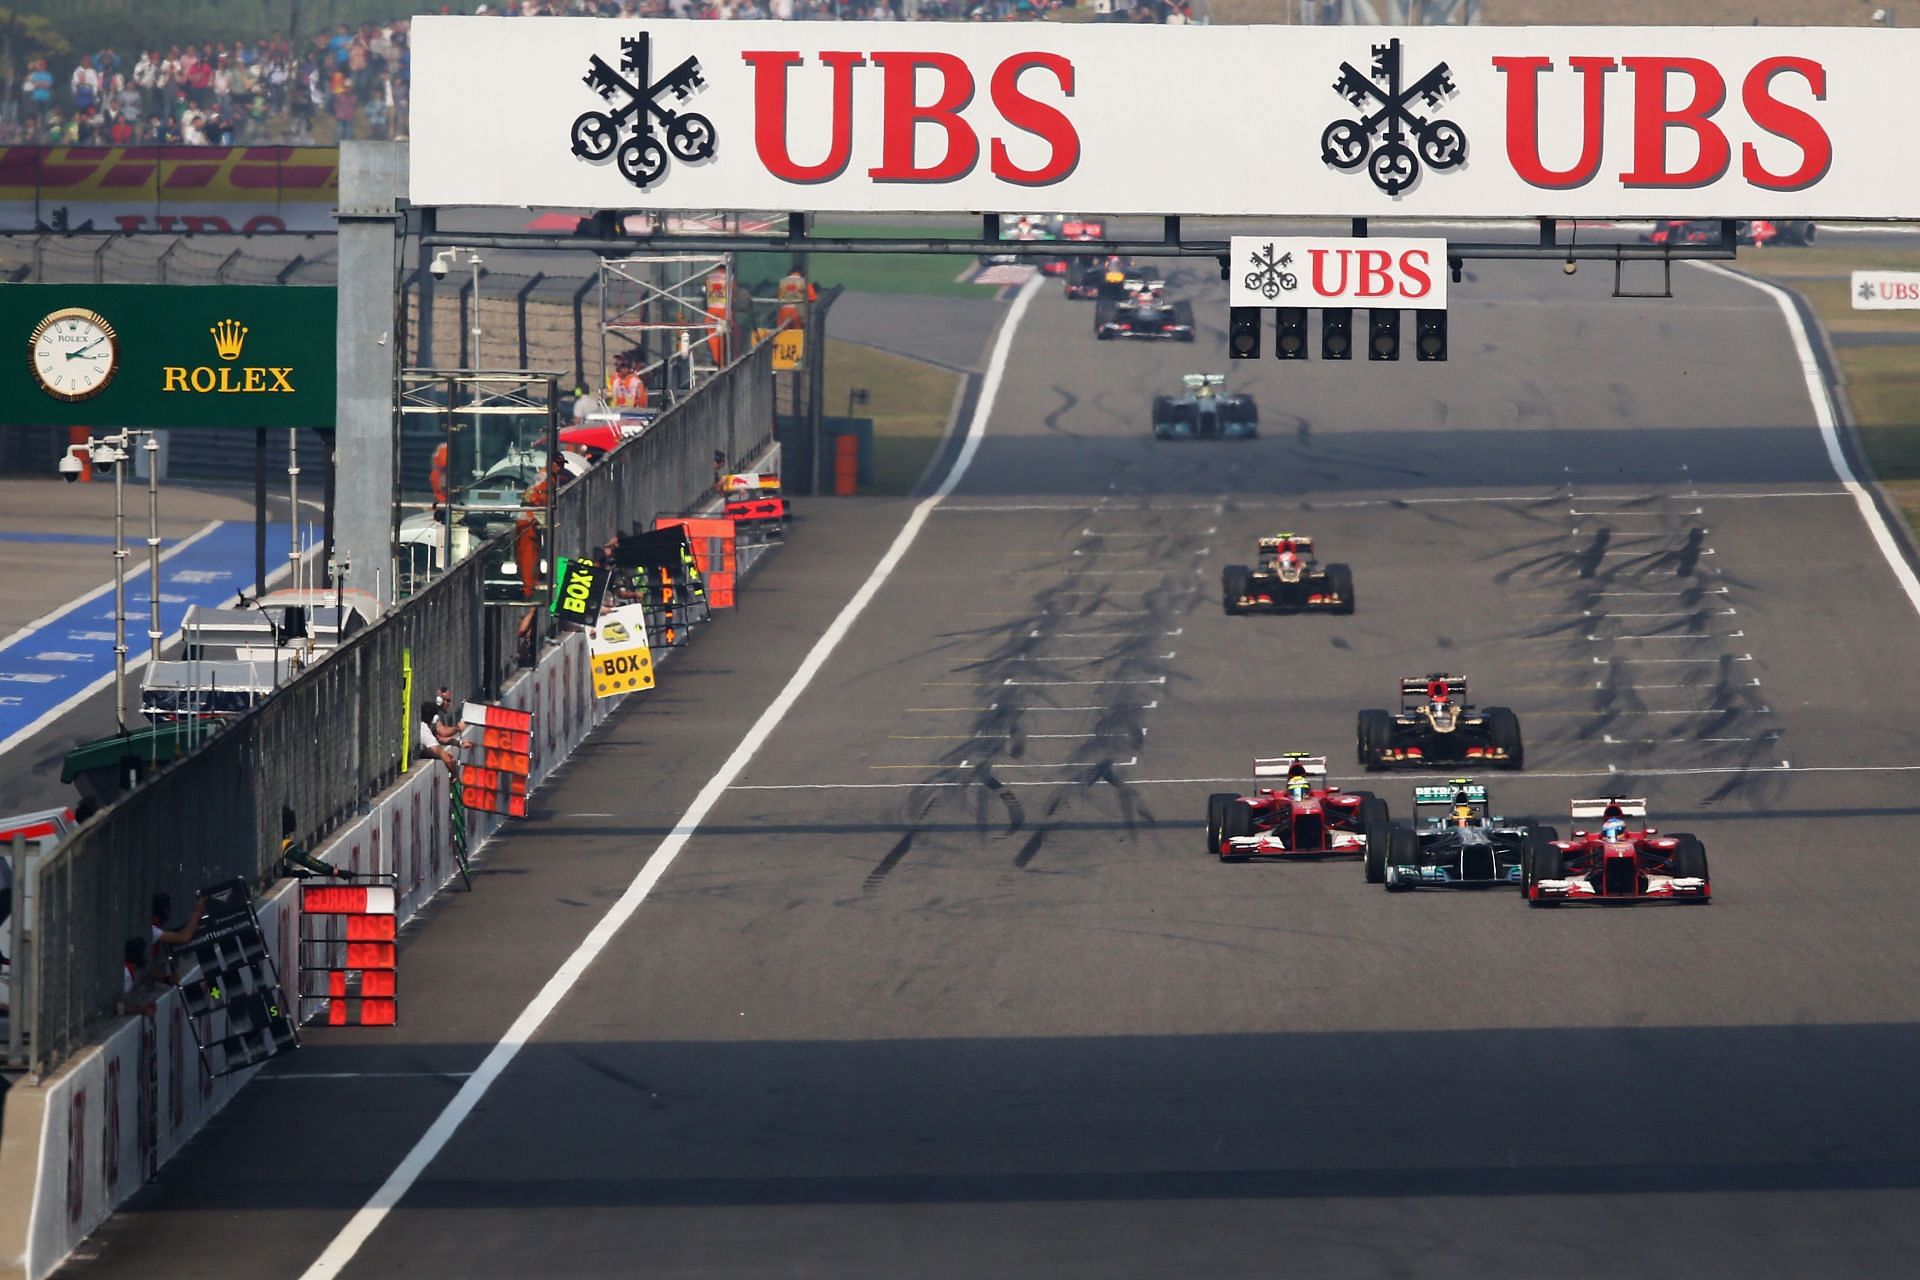 The FIA has sent driving standards guidelines that need to be strictly adhered to this season